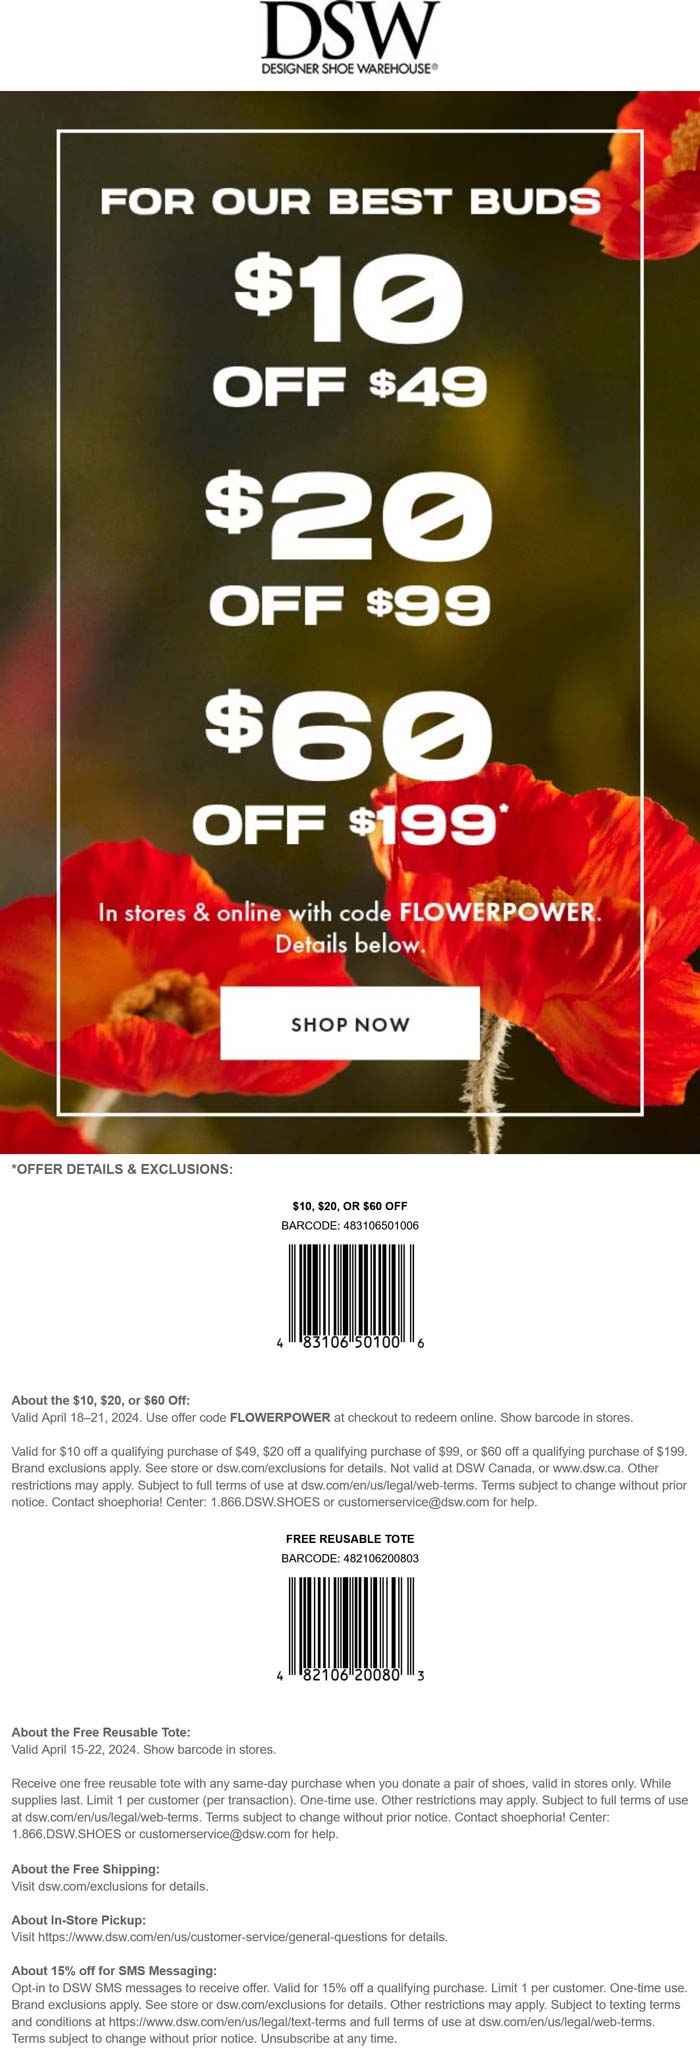 DSW stores Coupon  $10-$60 off $49+ at DSW shoes, or online via promo code FLOWERPOWER #dsw 